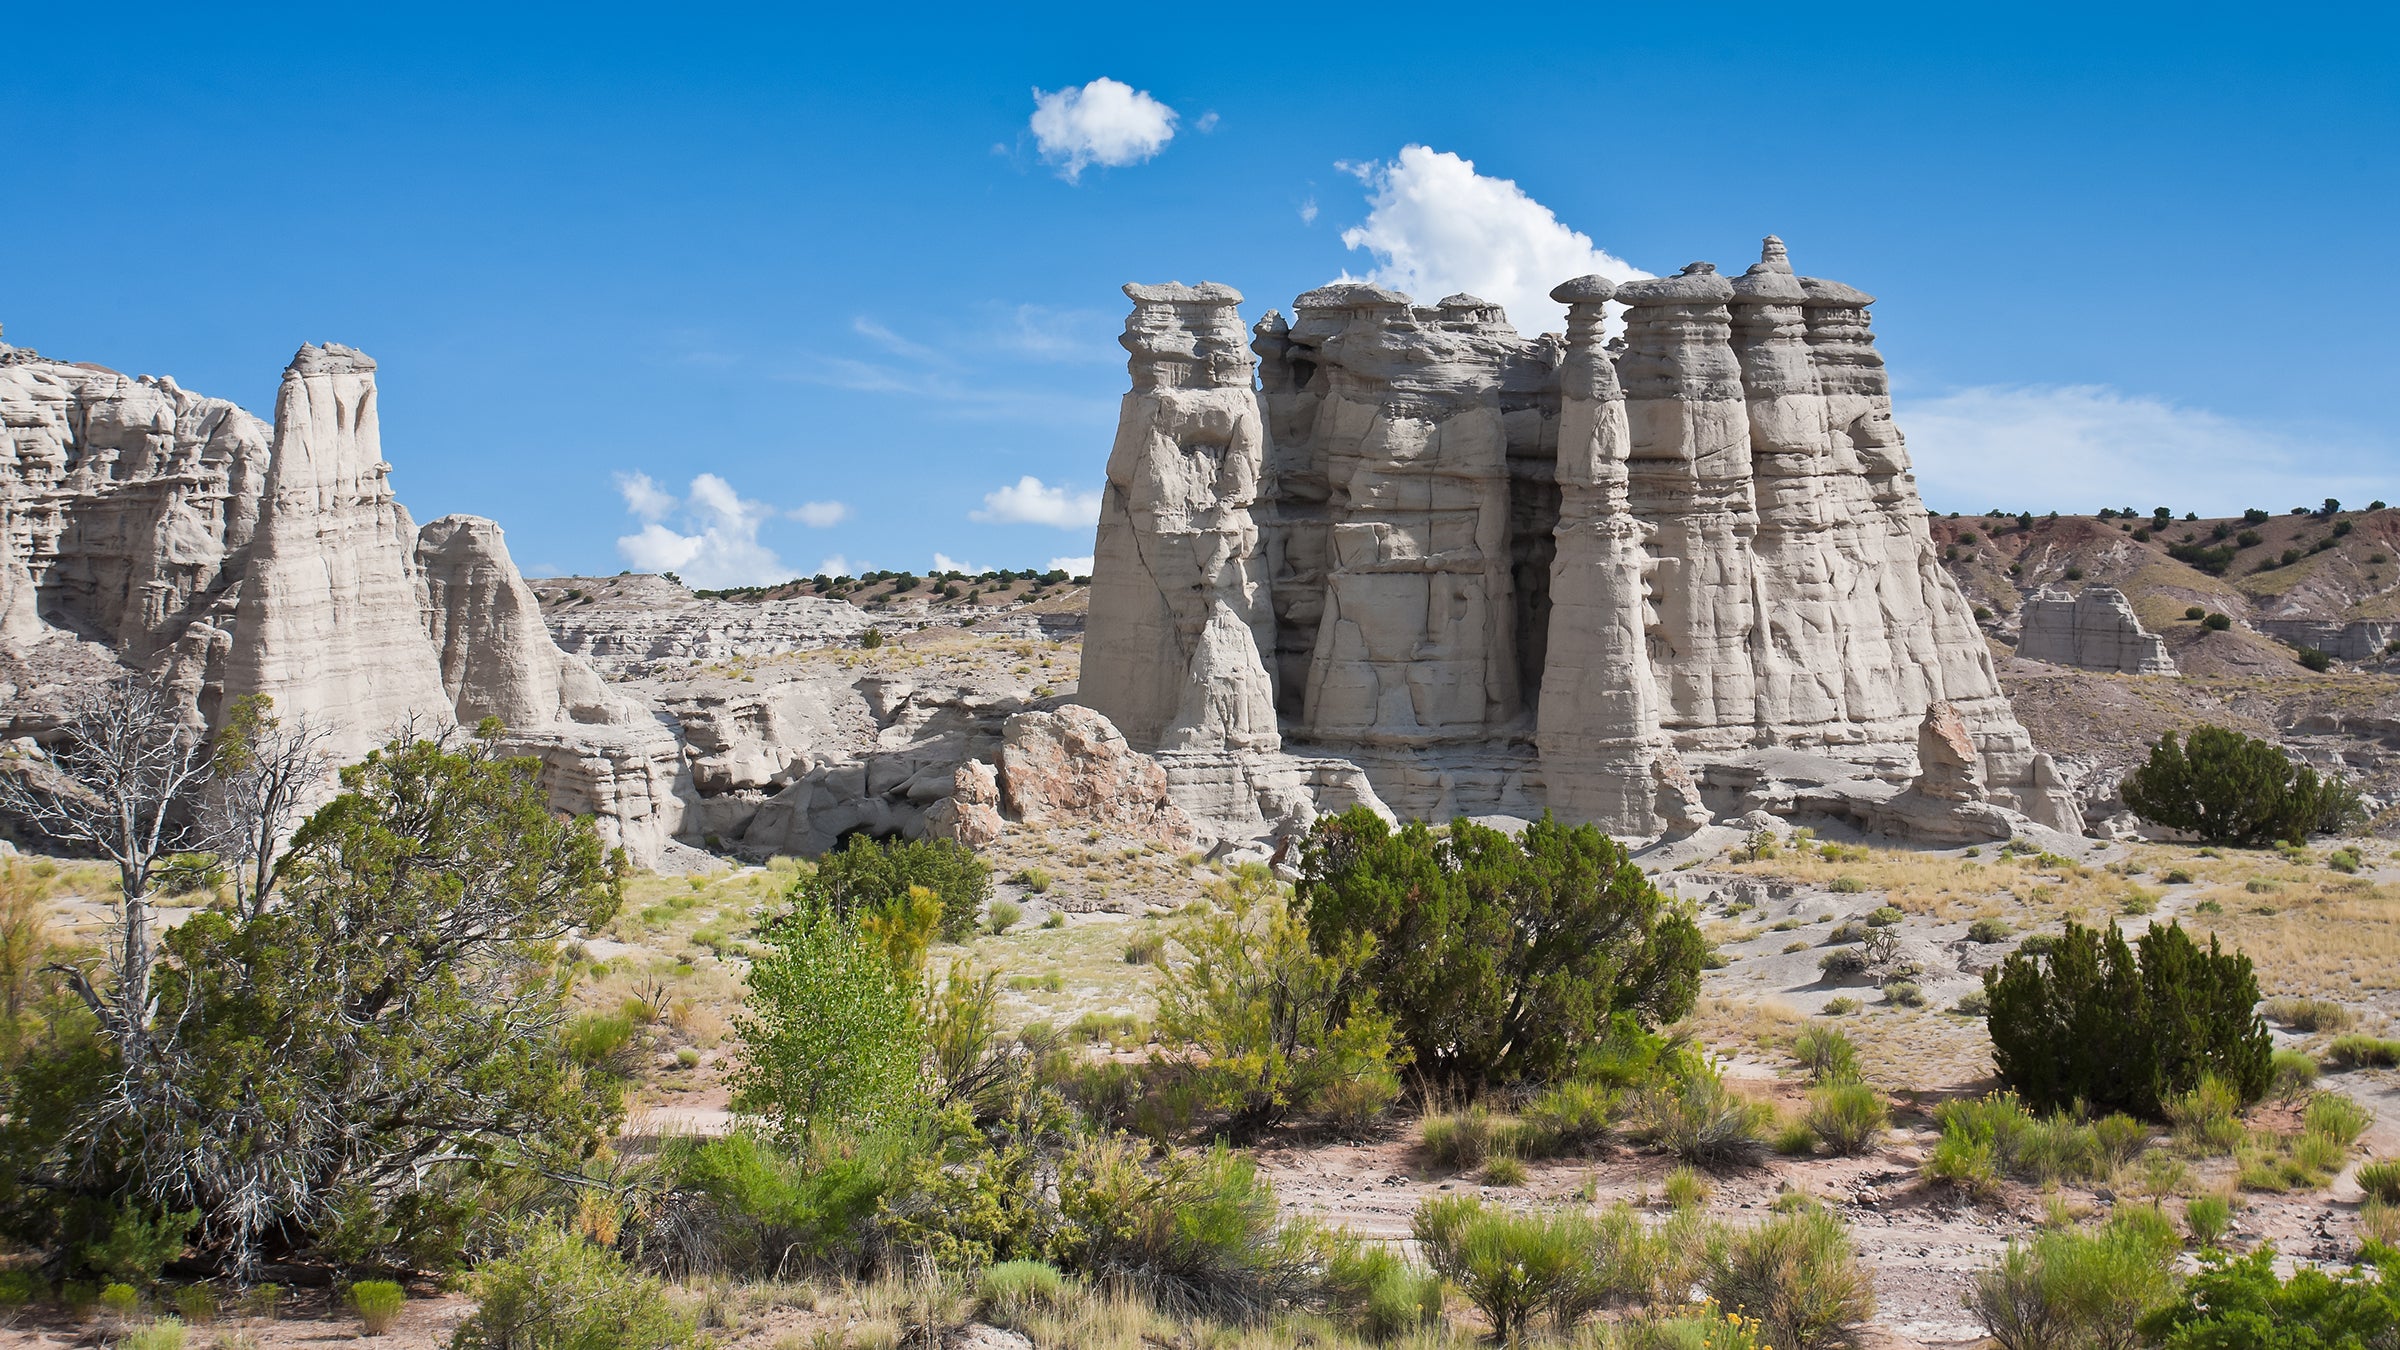 White limestone spears pearse the sky in New Mexico